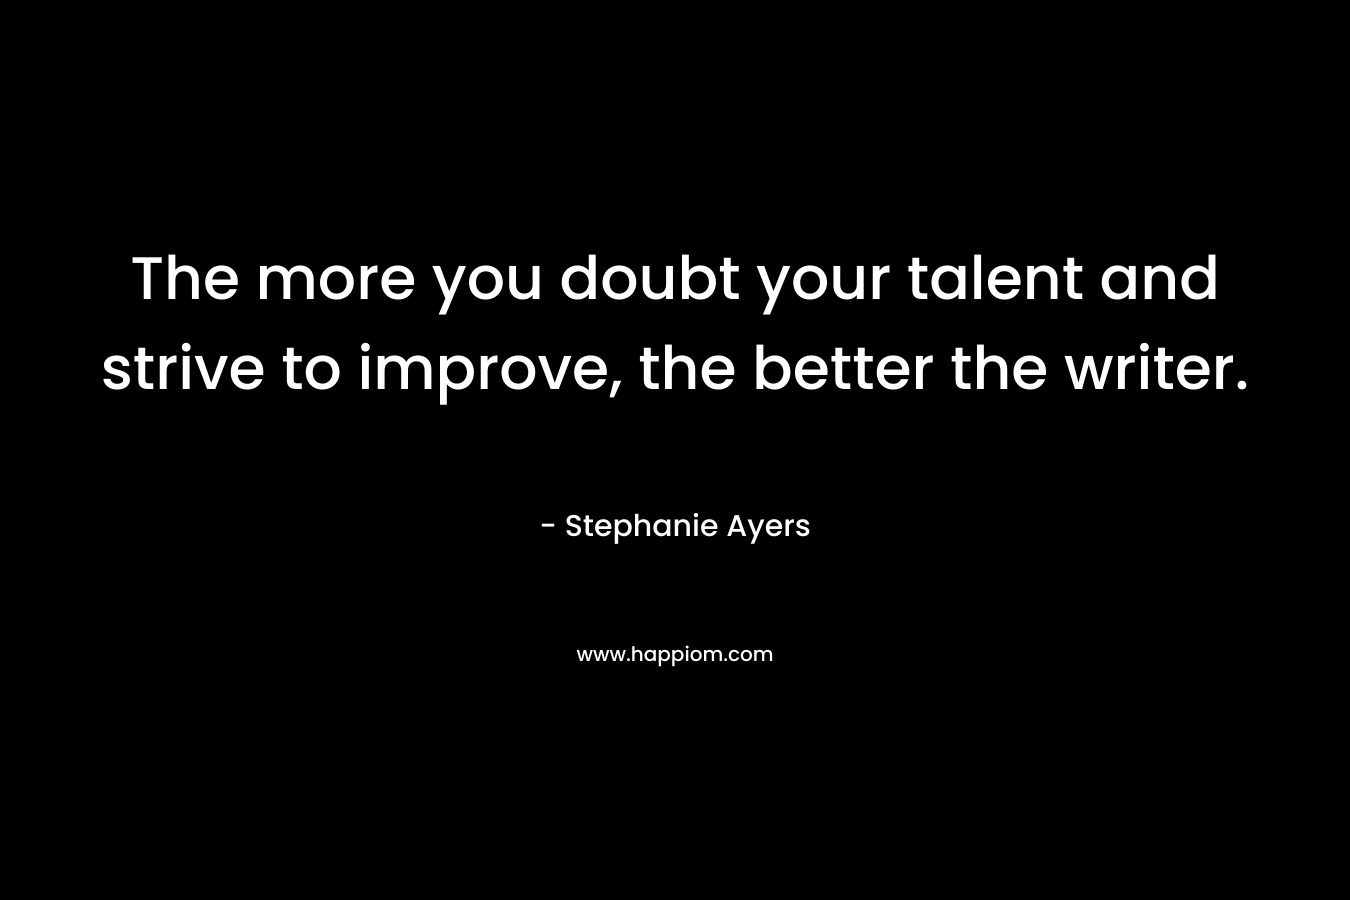 The more you doubt your talent and strive to improve, the better the writer. – Stephanie Ayers